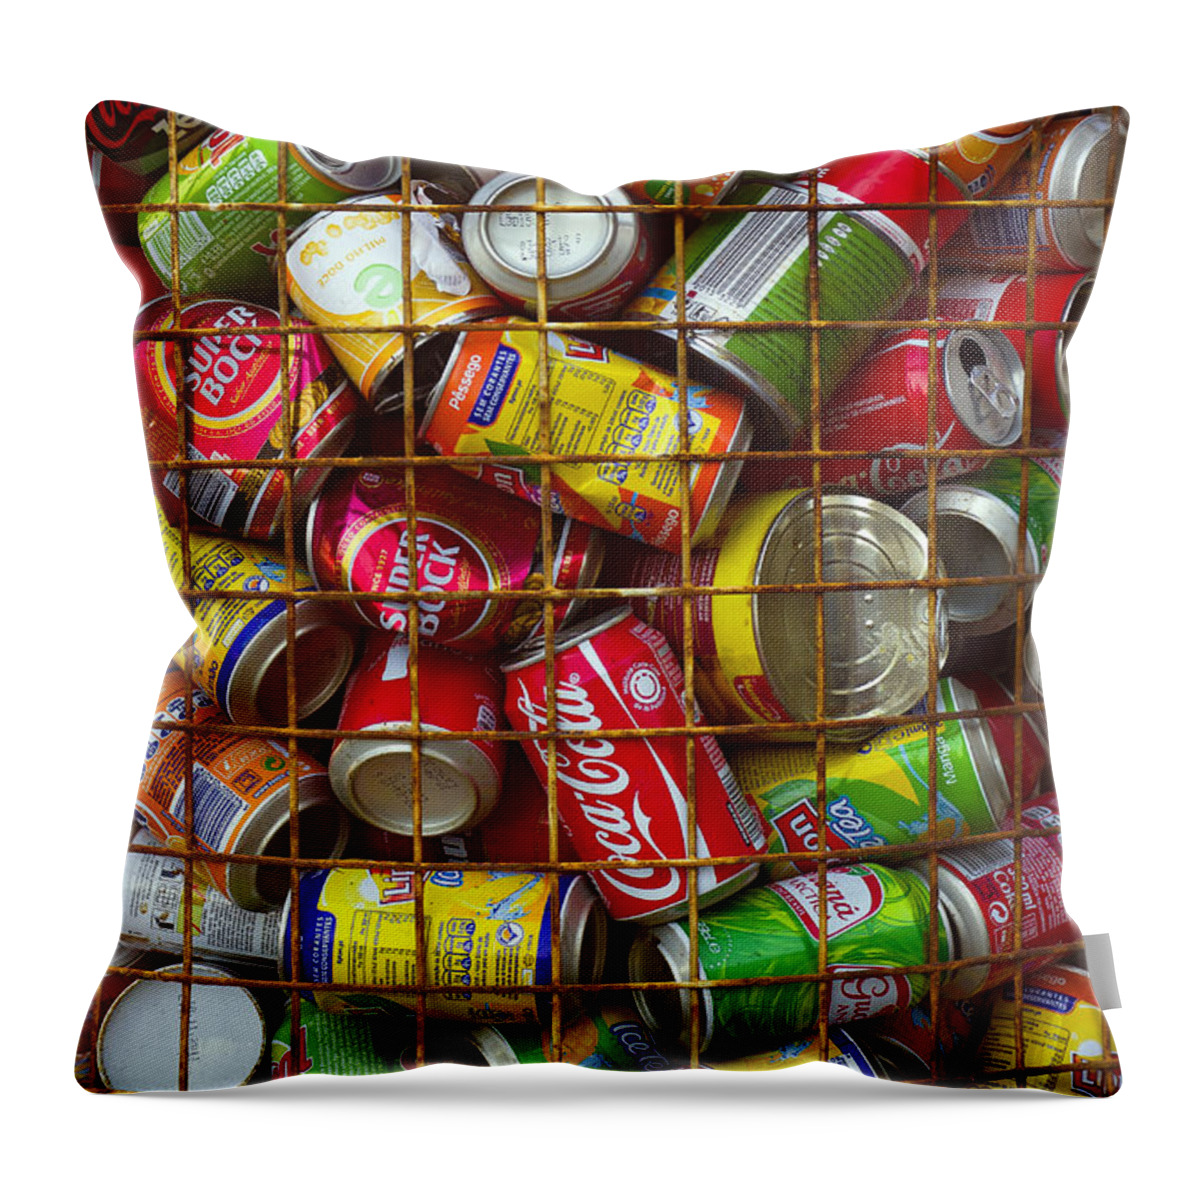 Abstract Throw Pillow featuring the photograph Recycling cans by Carlos Caetano